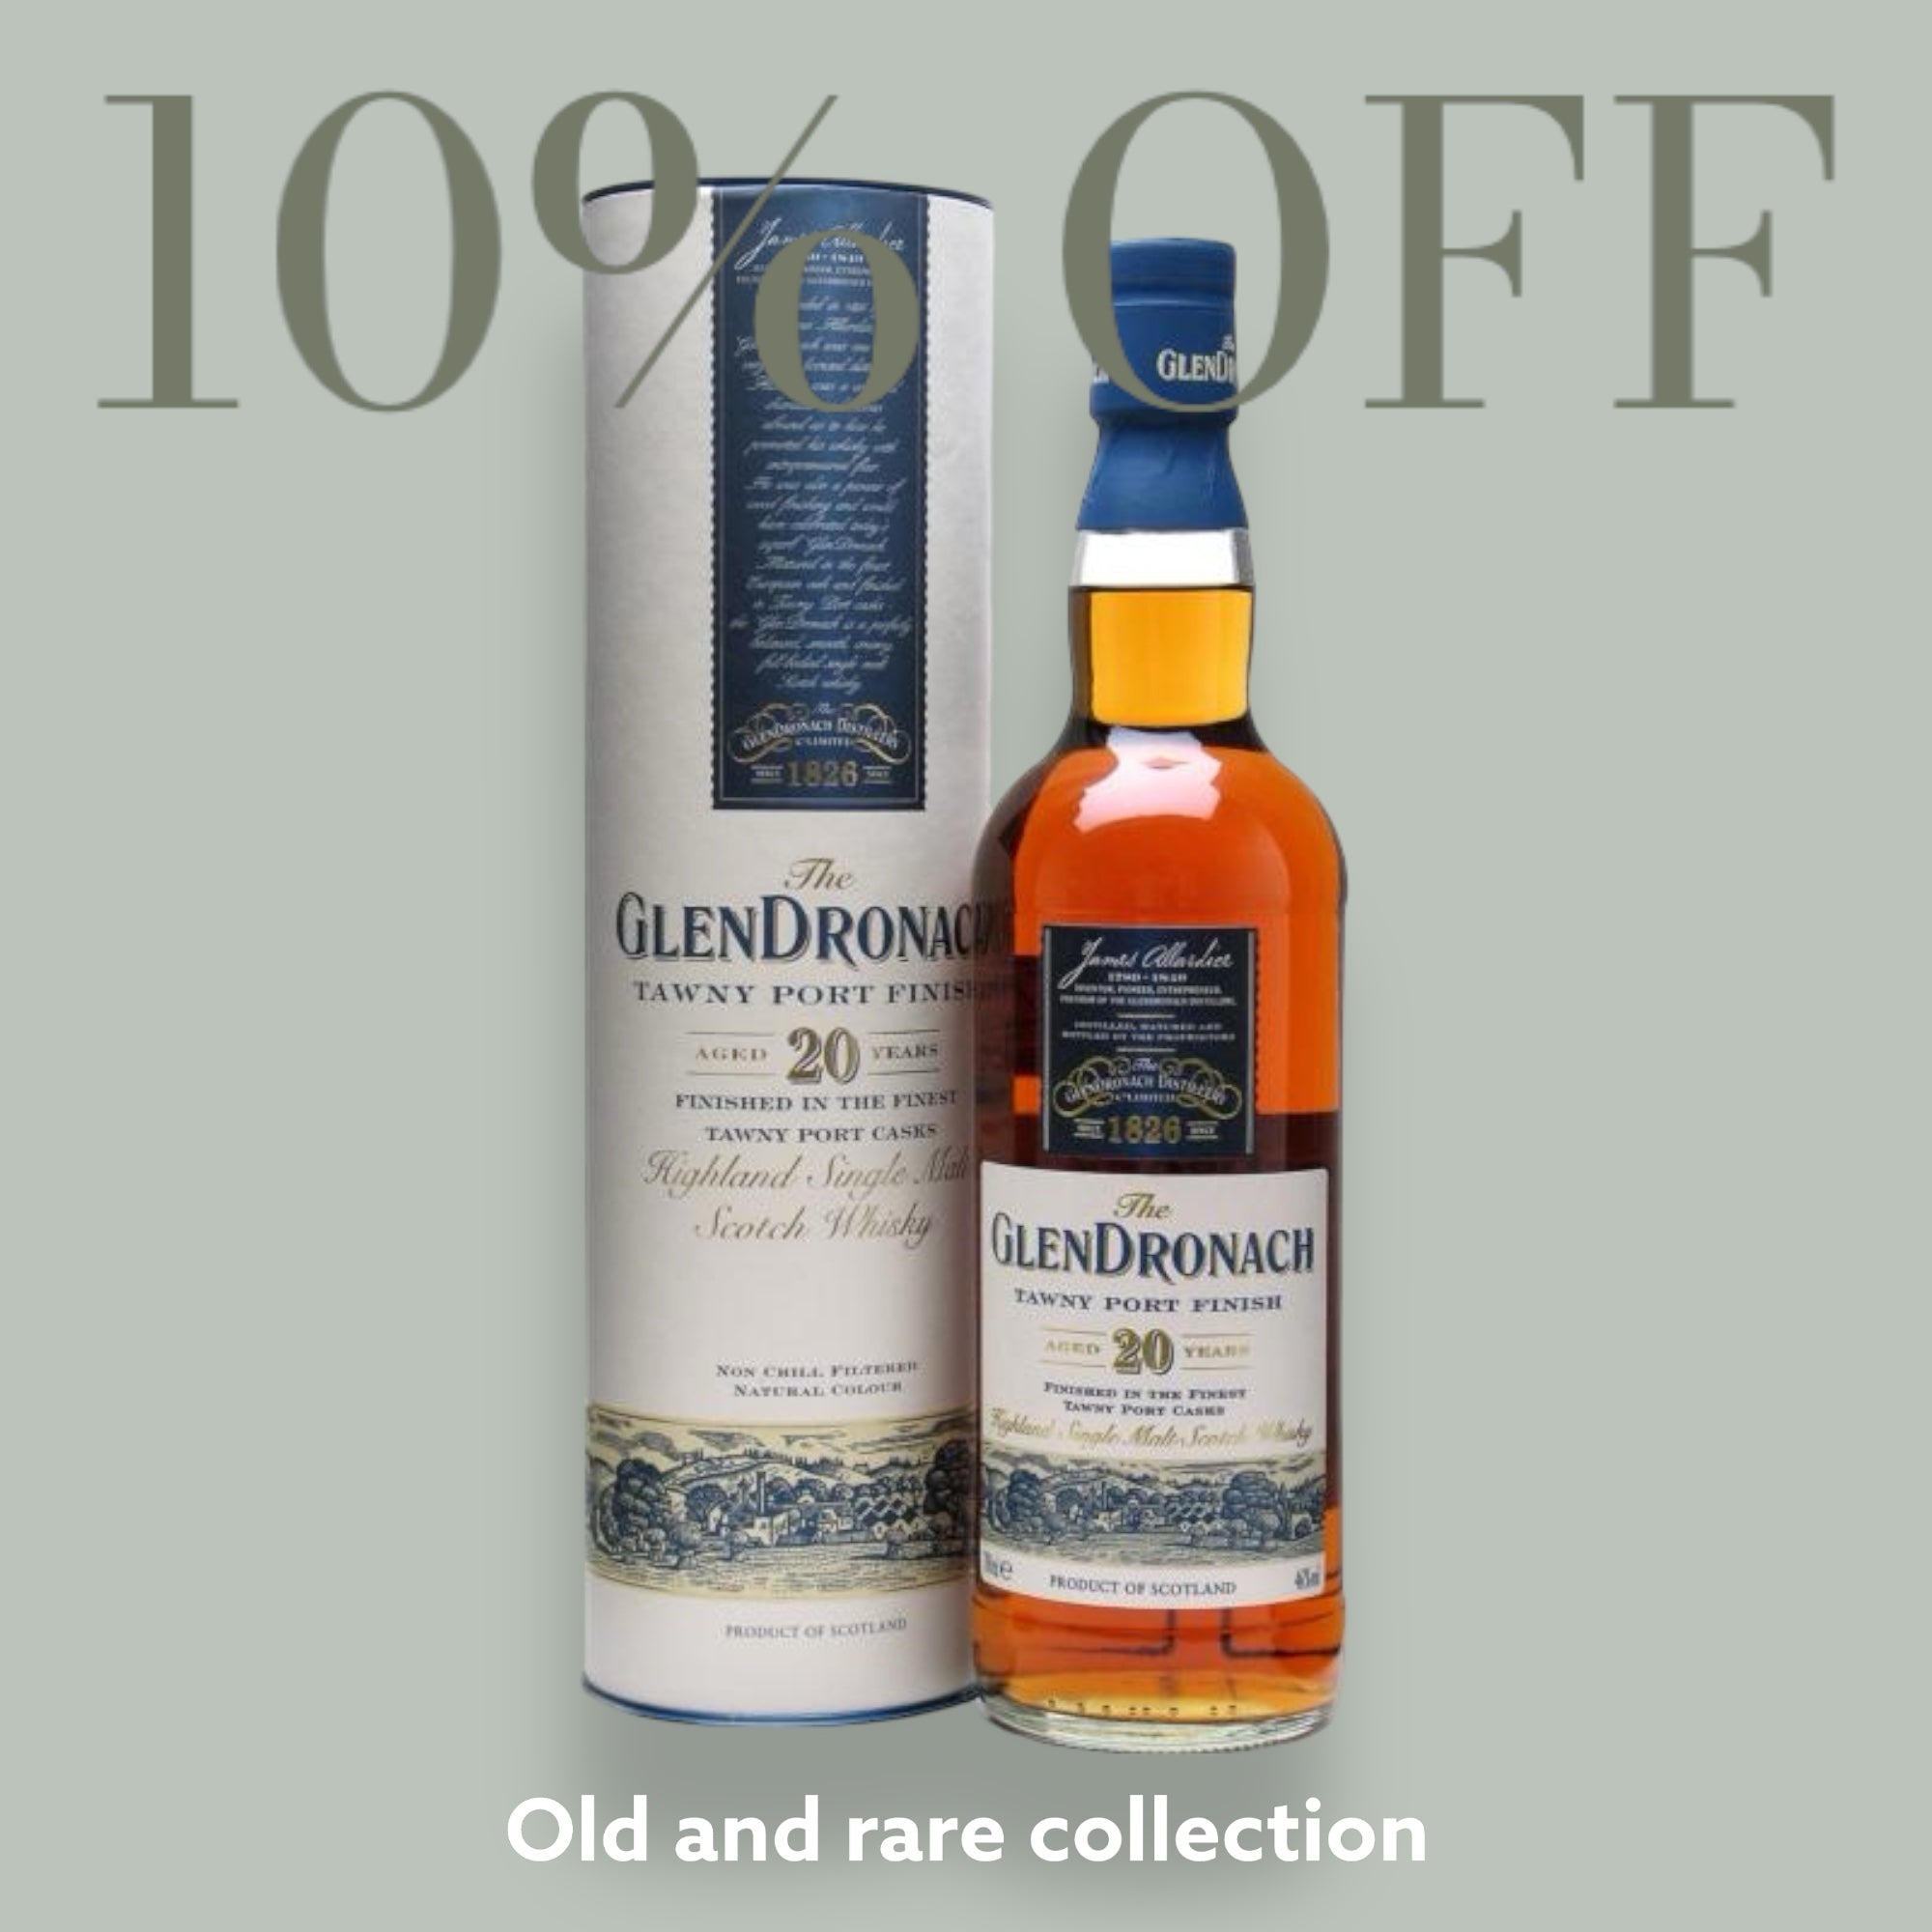 Dive into the Velvety Depths of Glendronach 20 Year Old Tawny Port Finish